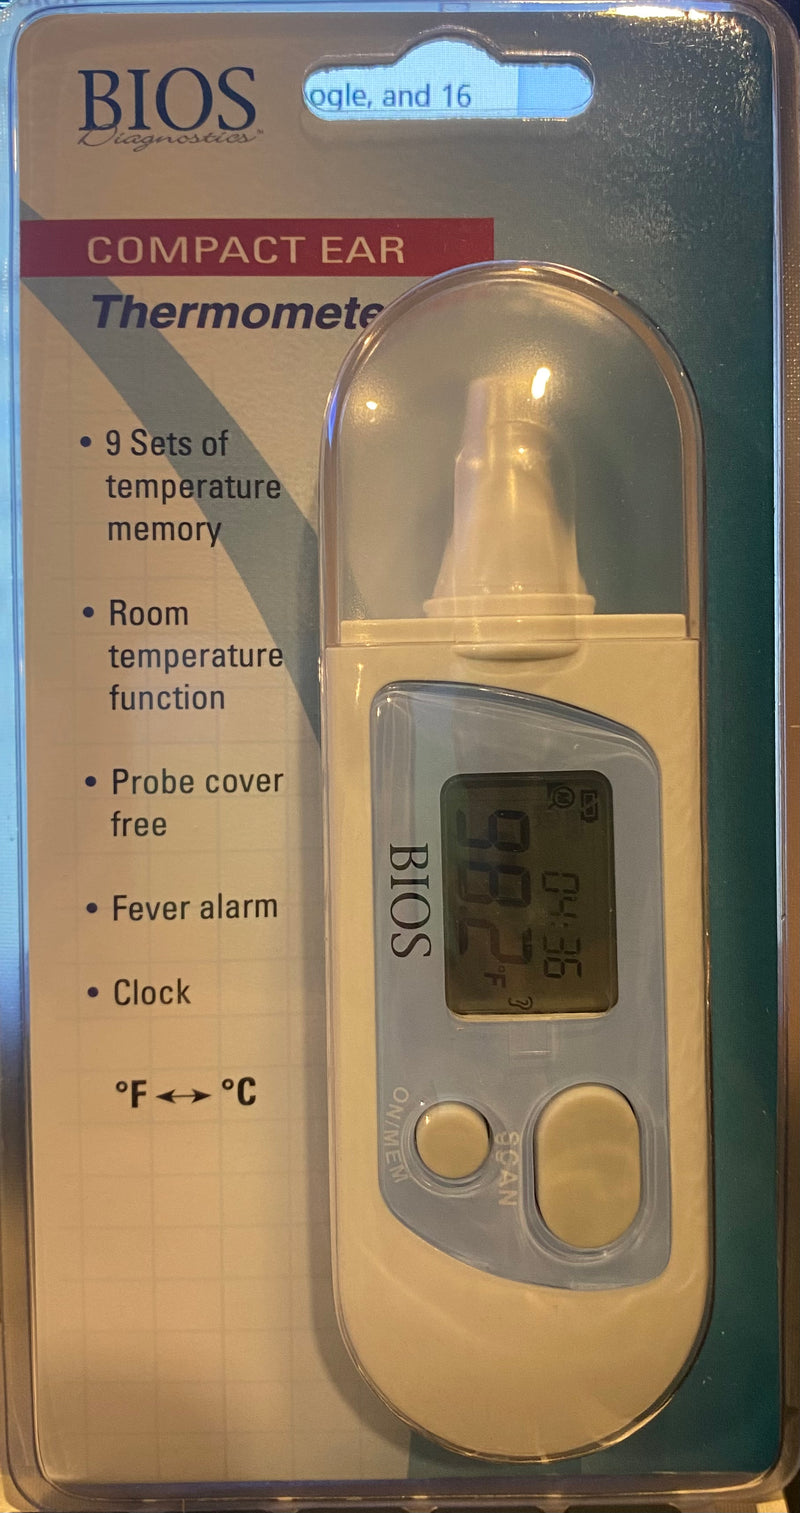 Clearance - Bios Medical Compact Ear Thermometer